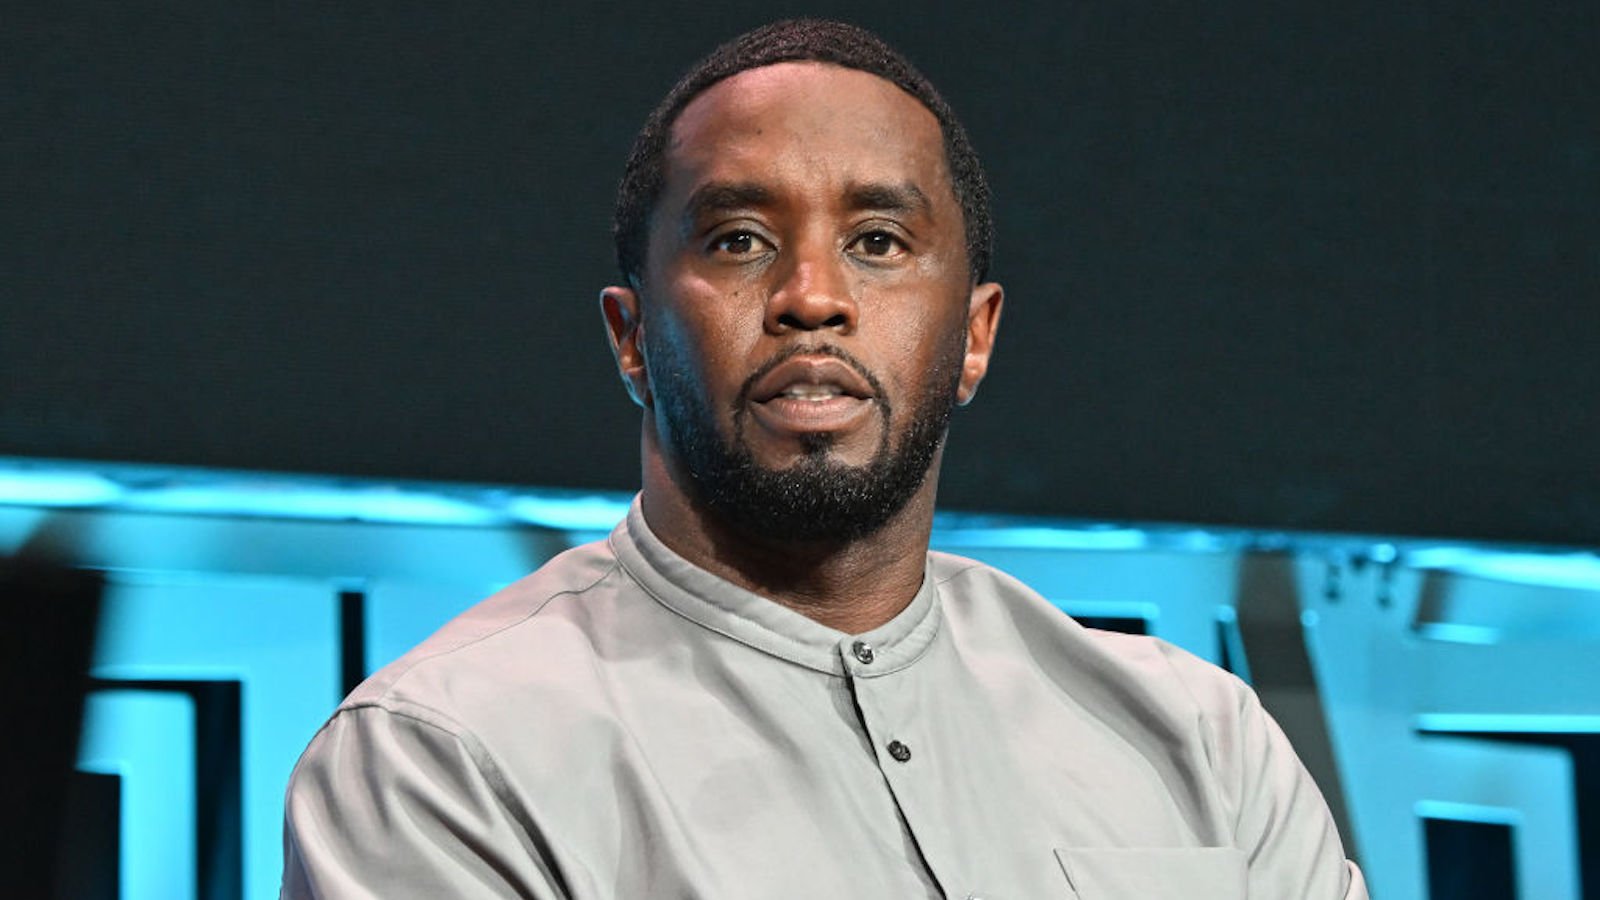 Diddy Has Been Accused Of Another Heinous Crime Involving A Teenage Girl